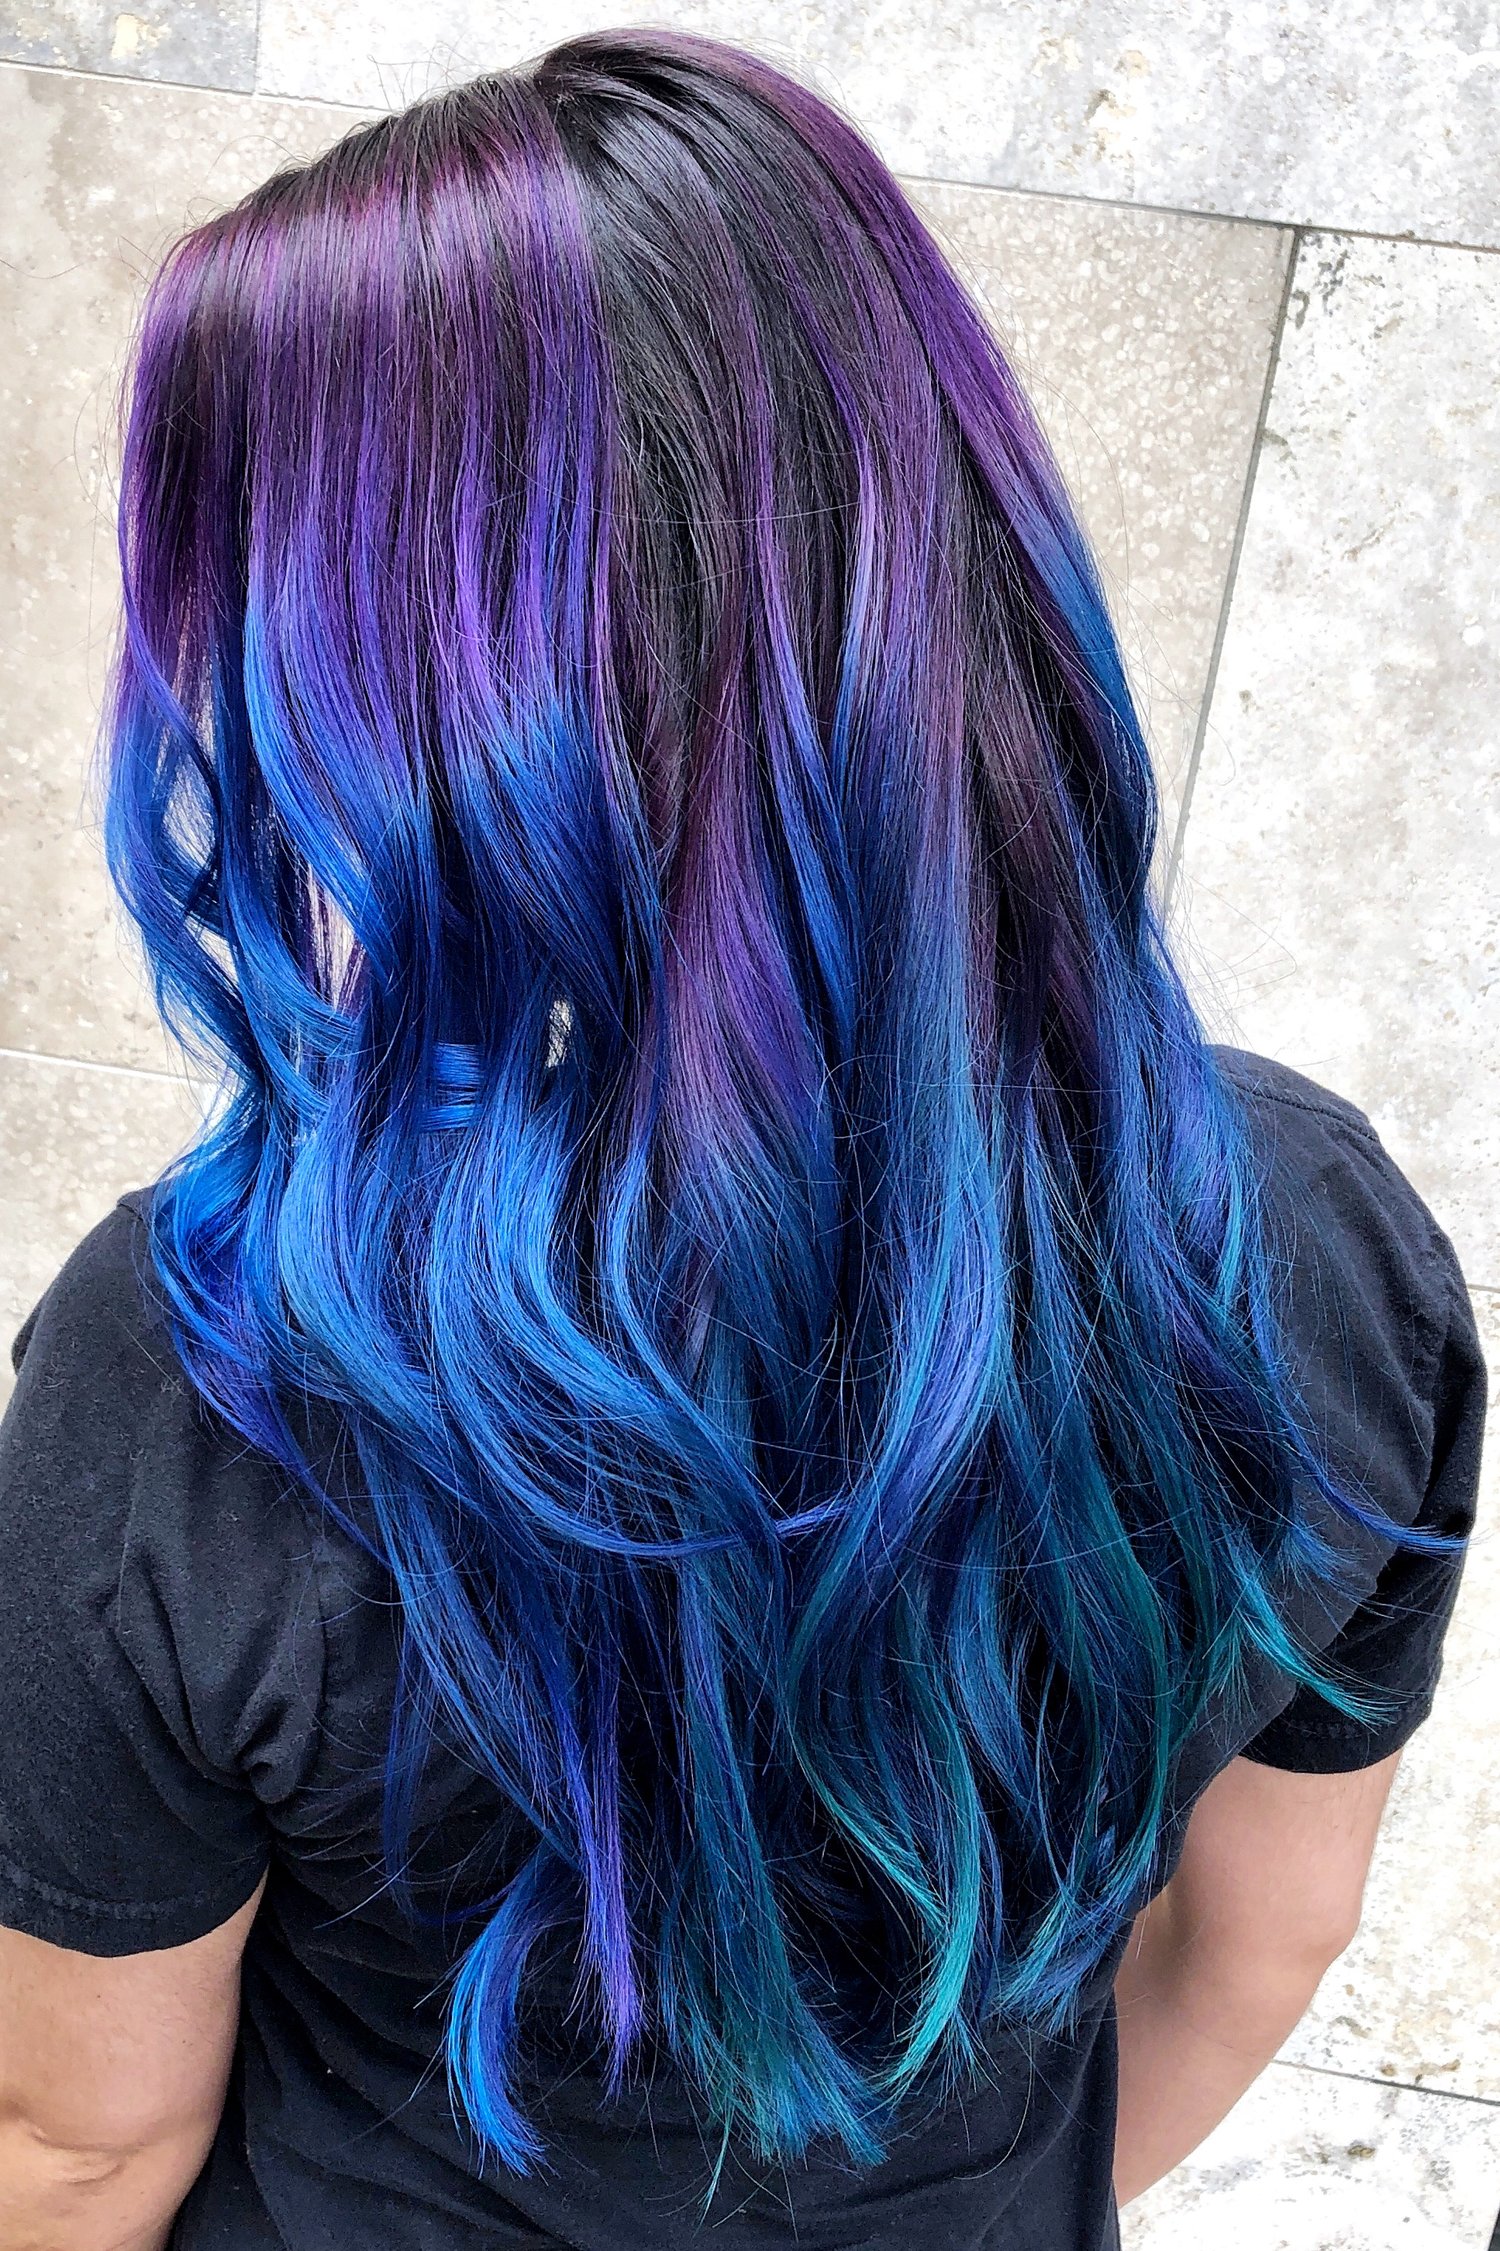 I dyed my hair blue and I love it!! — Kristen Marina